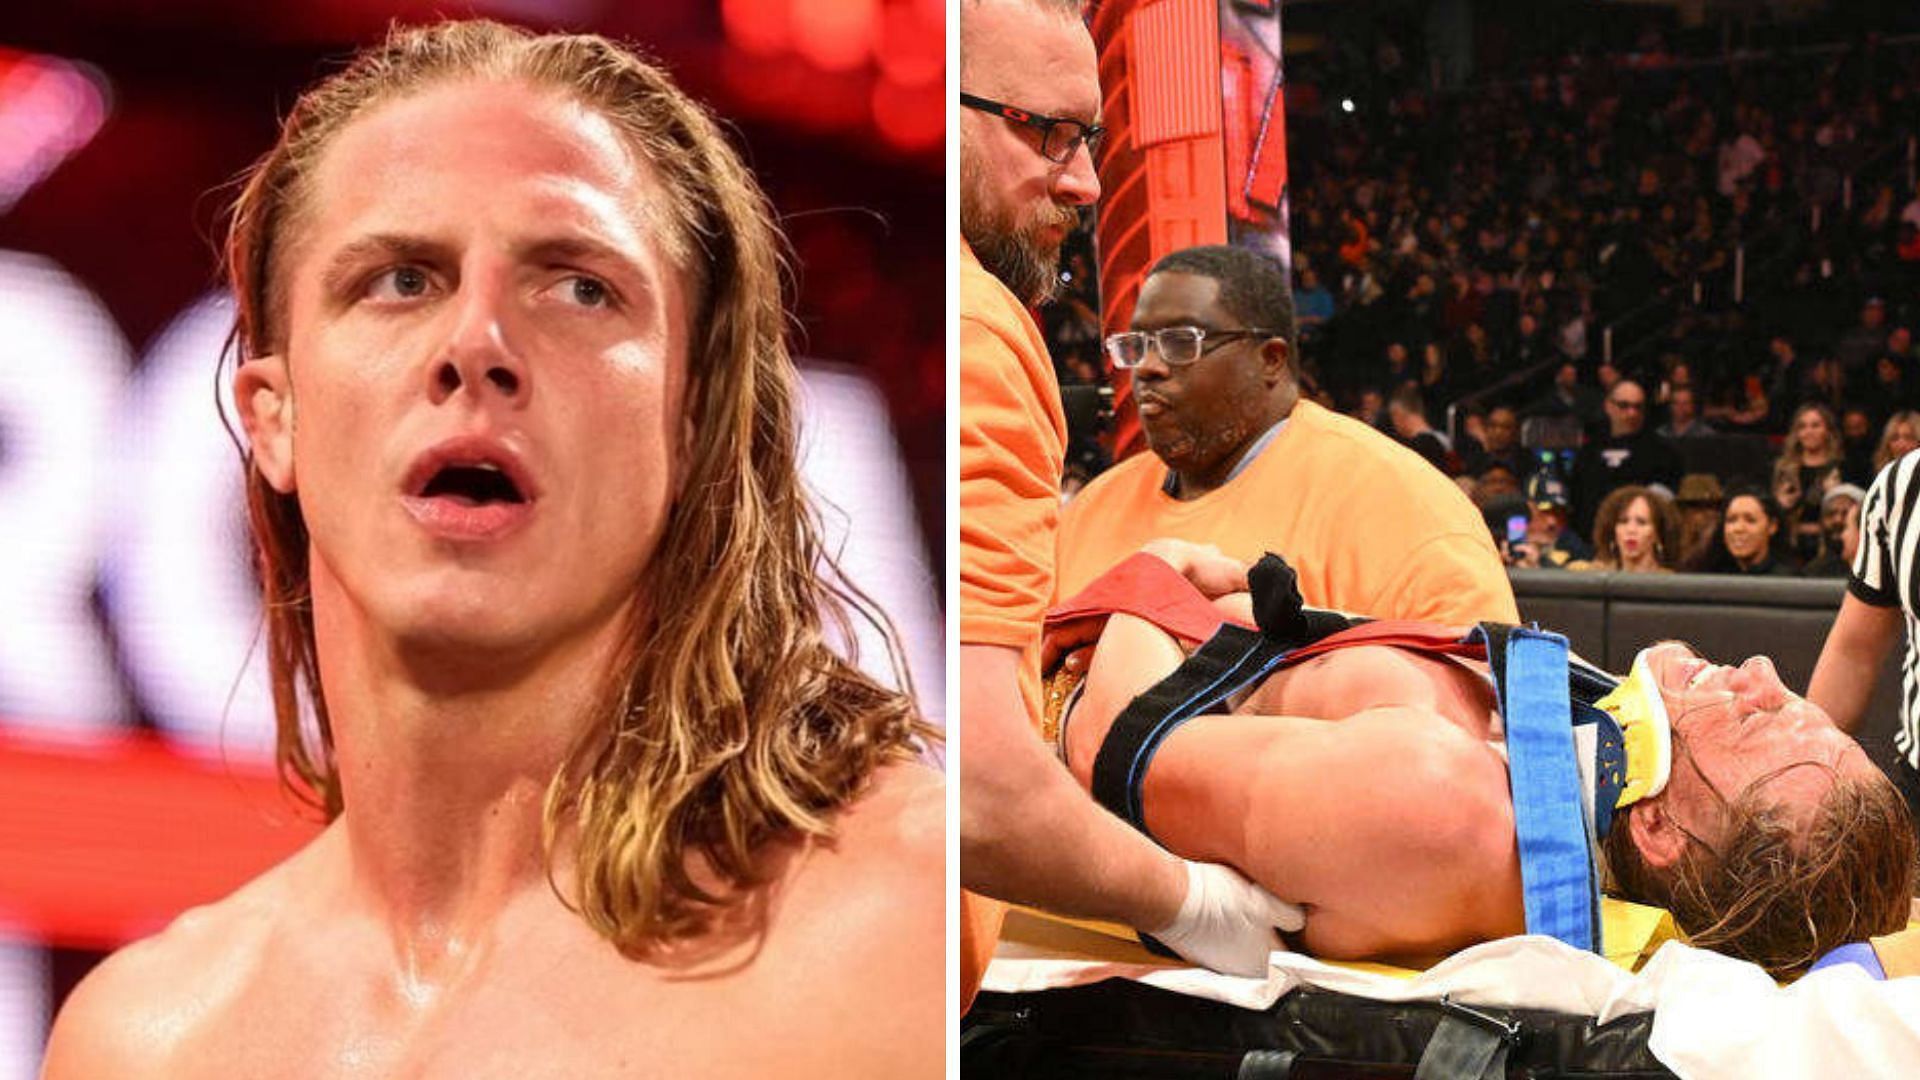 Matt Riddle was written off of WWE TV this past Monday on RAW